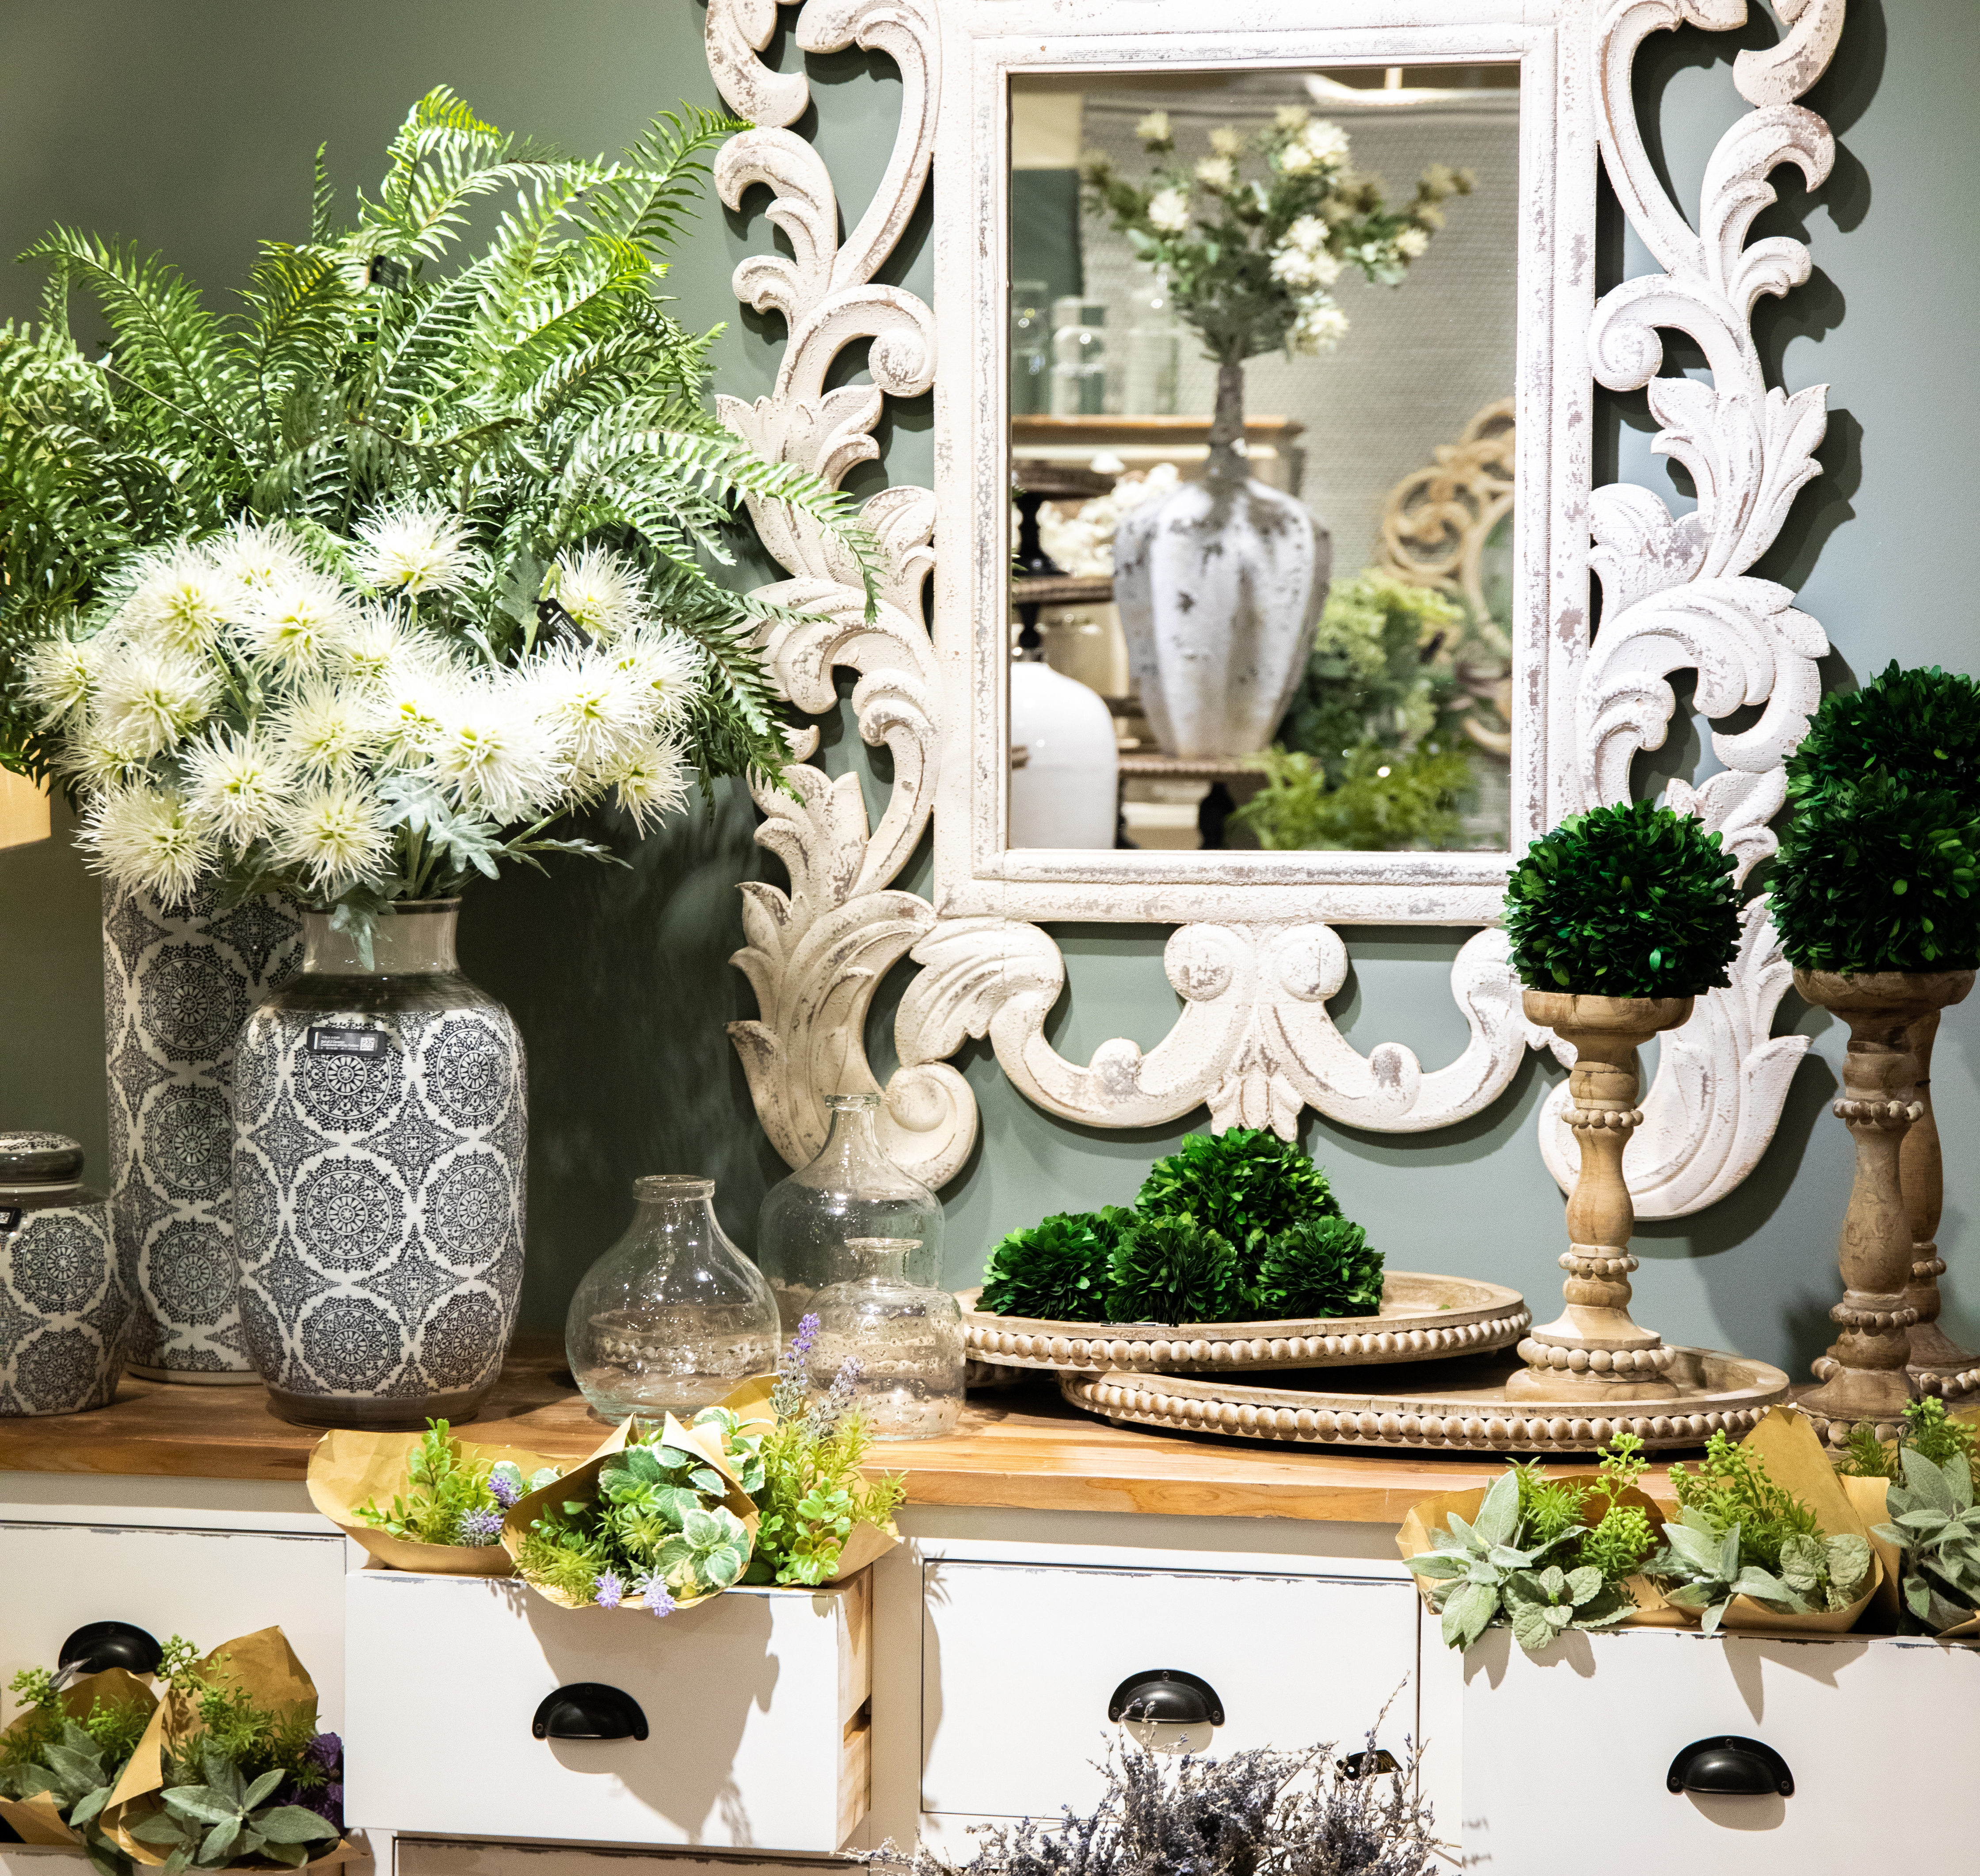 Mirror with green wall, Gifts, Décor and More